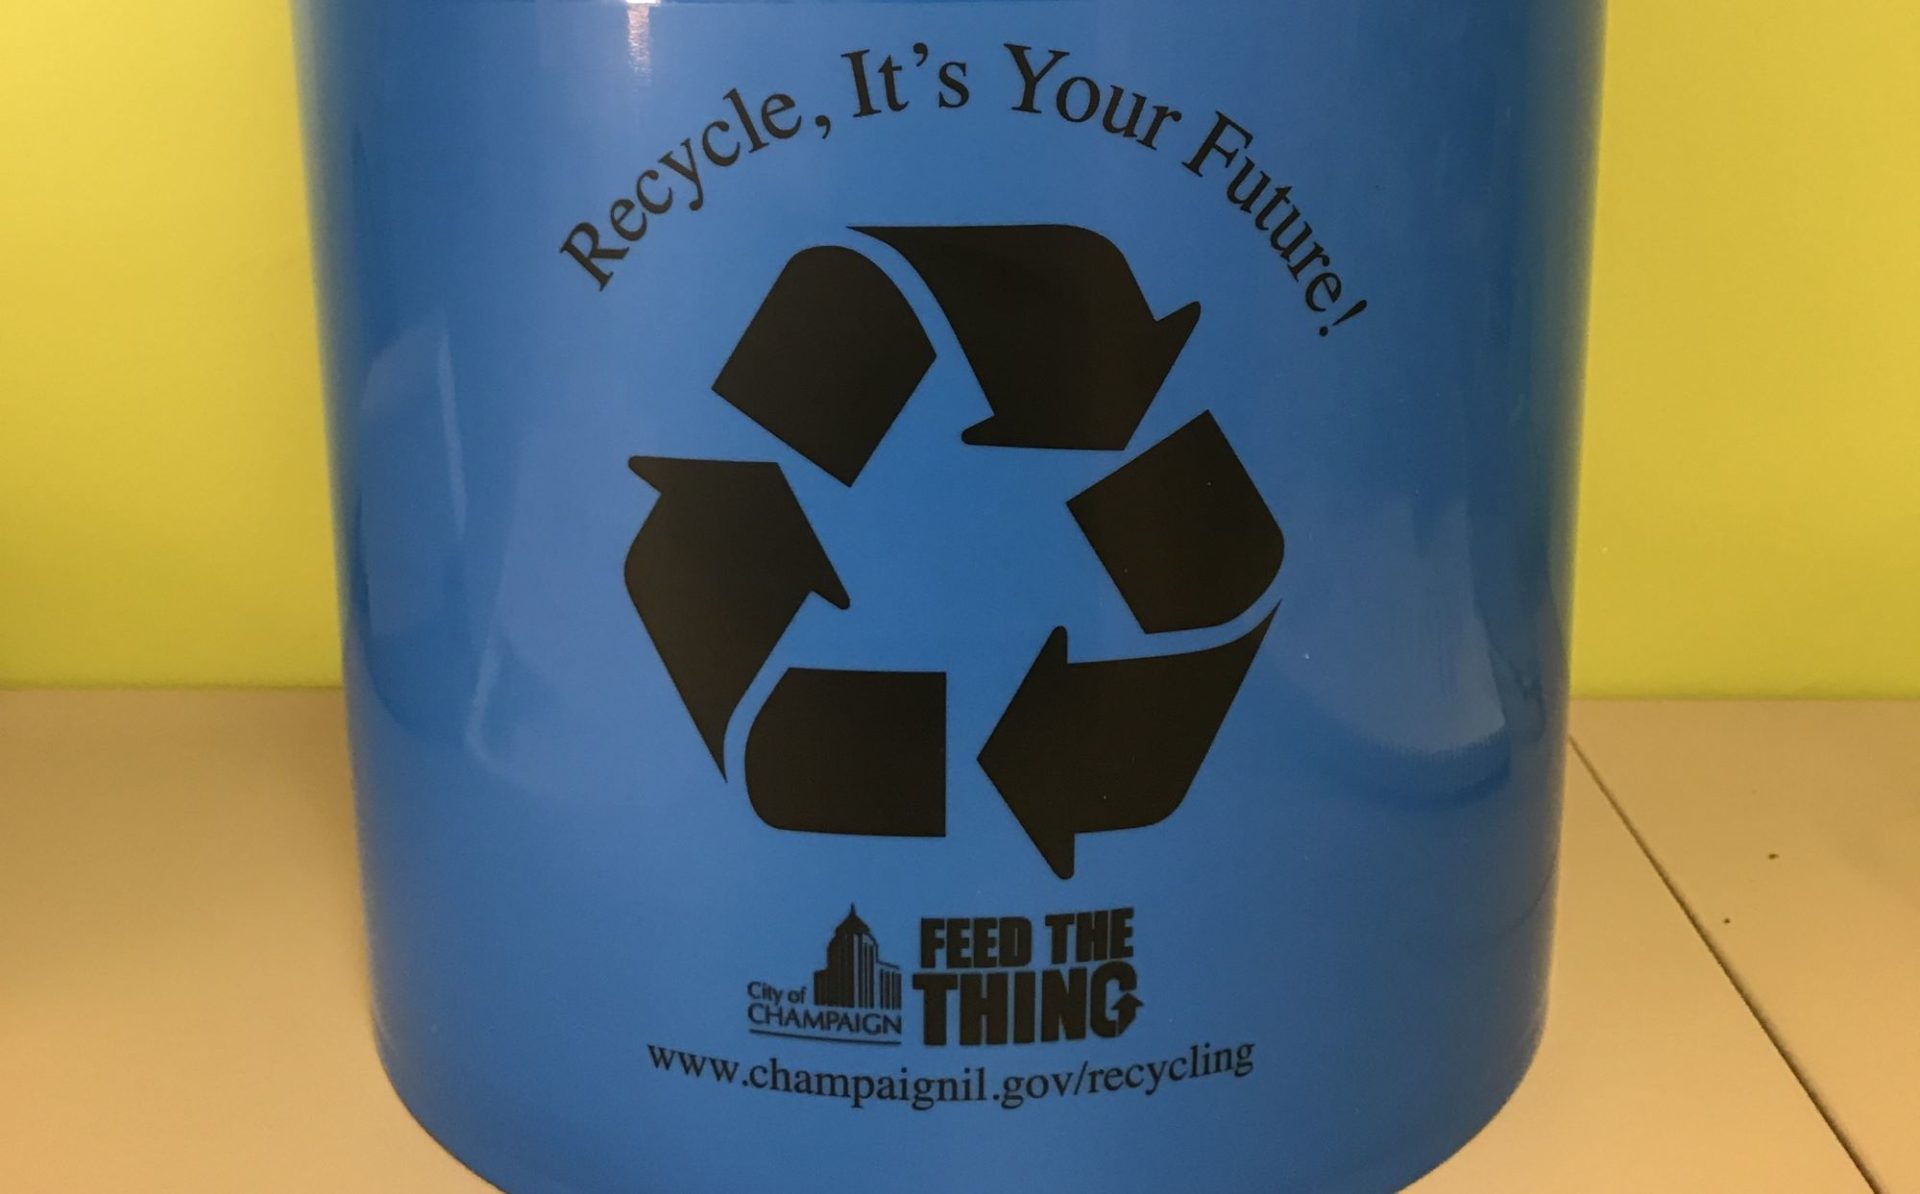 Learn more about recycling from local sustainability leaders